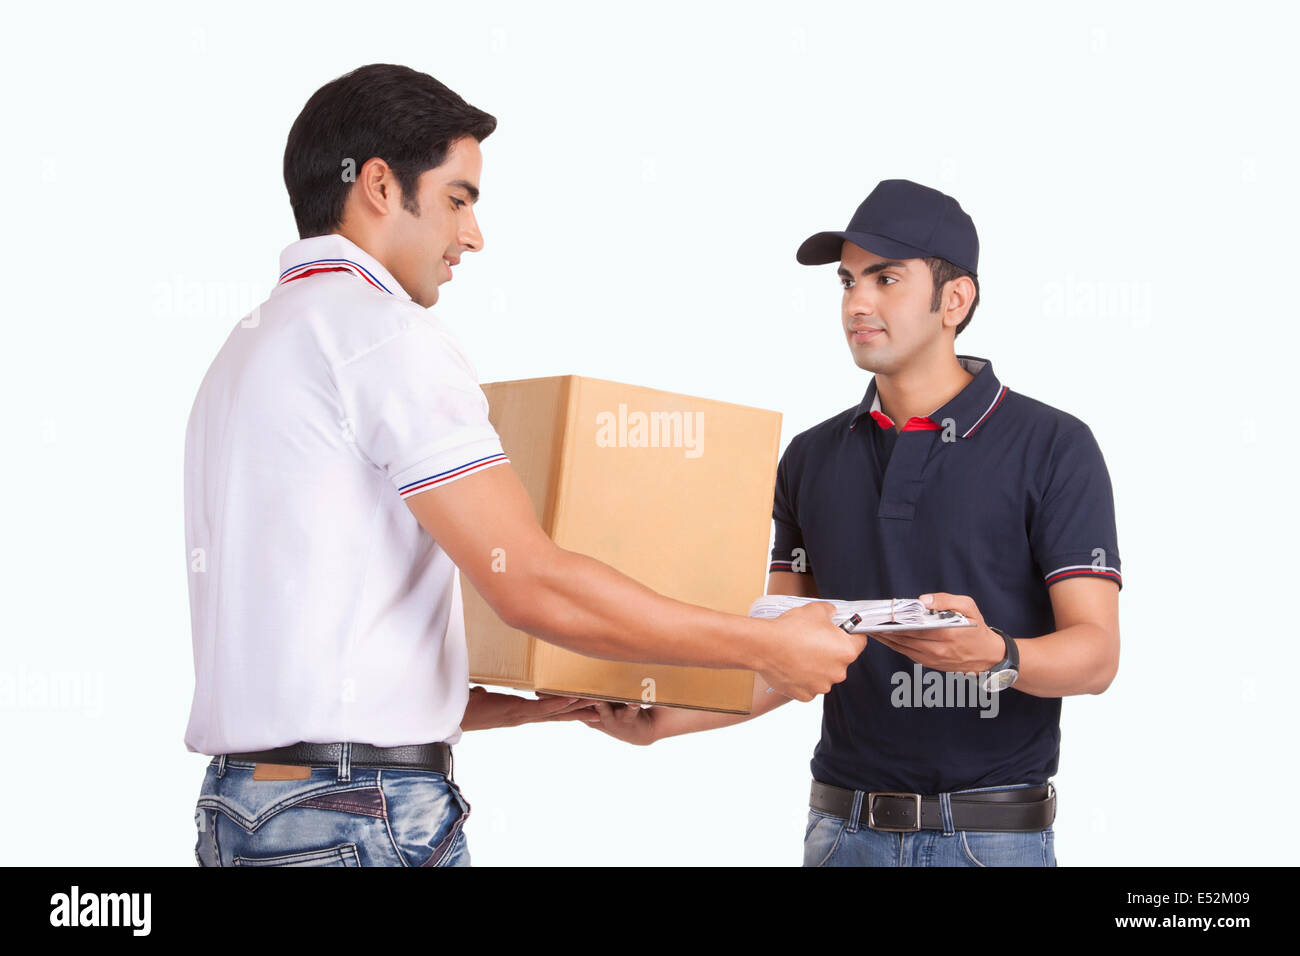 Male delivery person giving package to customer against white background Stock Photo